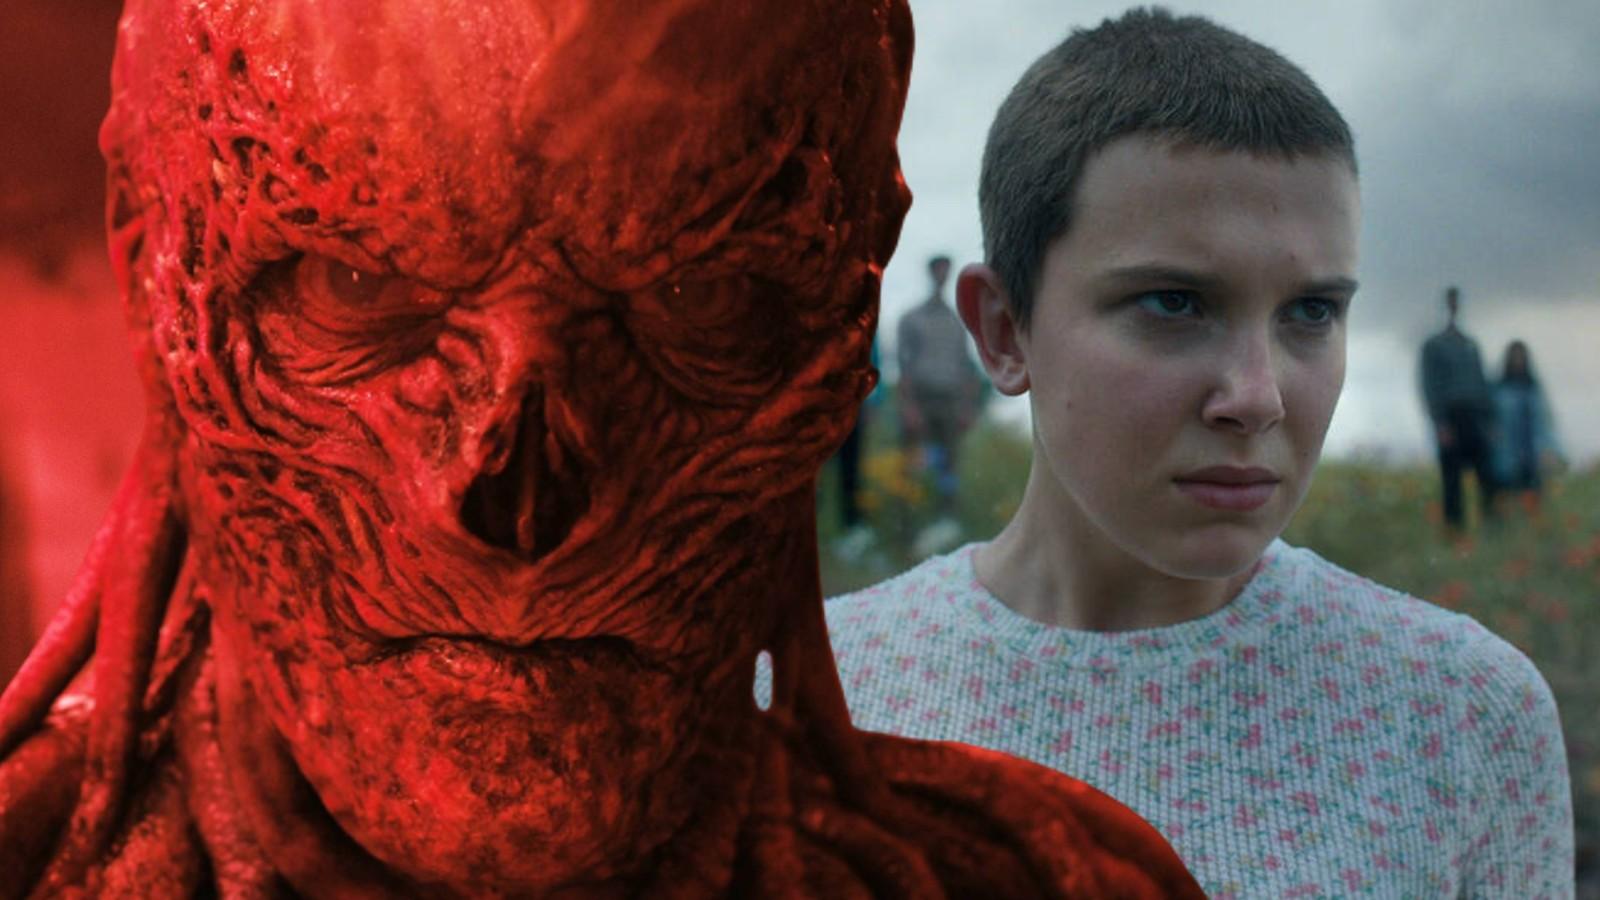 Vecna and Eleven in Stranger Things, both are returning for Season 5